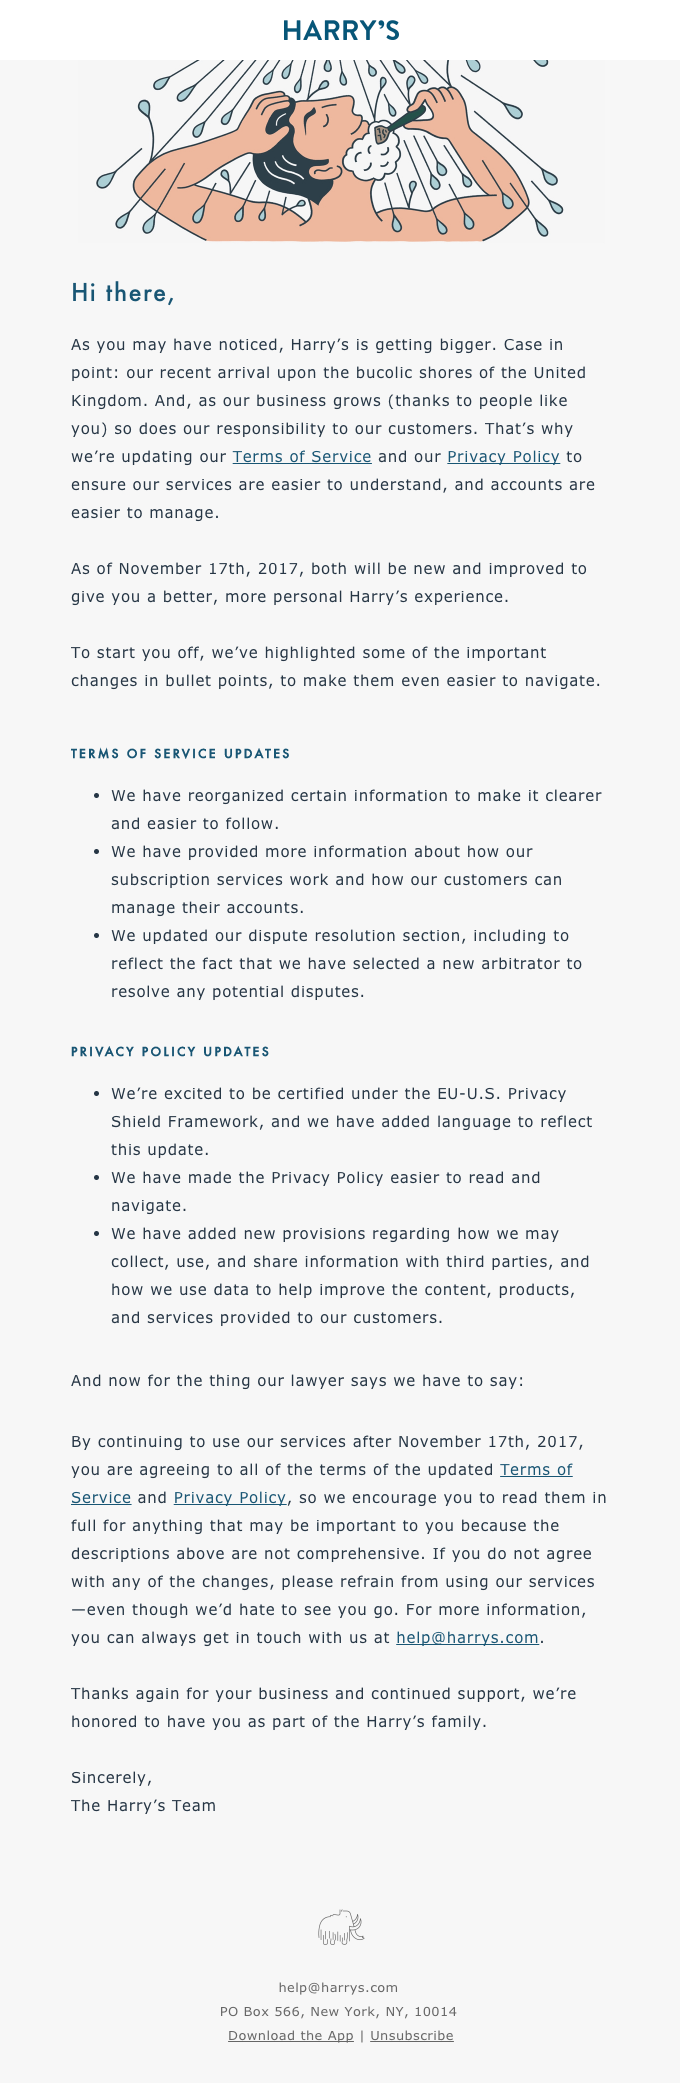 We’ve updated our Terms of Service and Privacy Policy